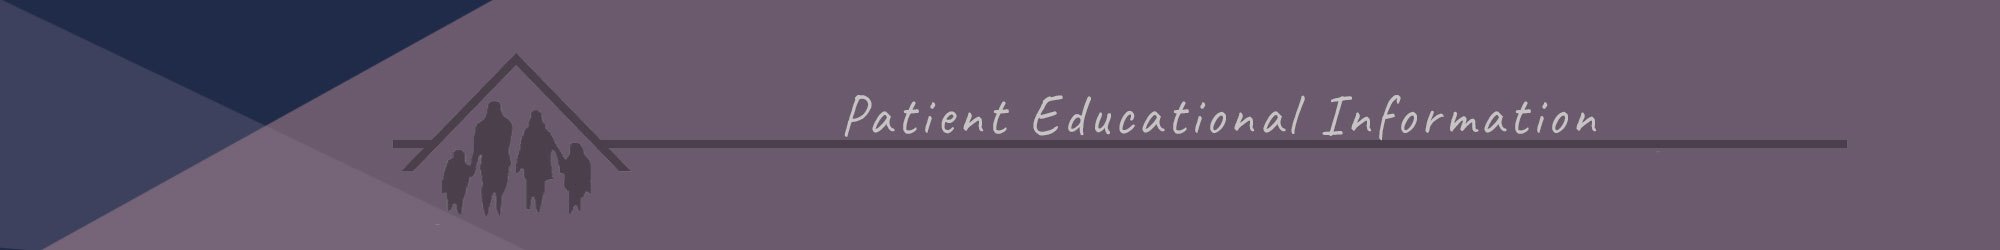 Dental Education Page